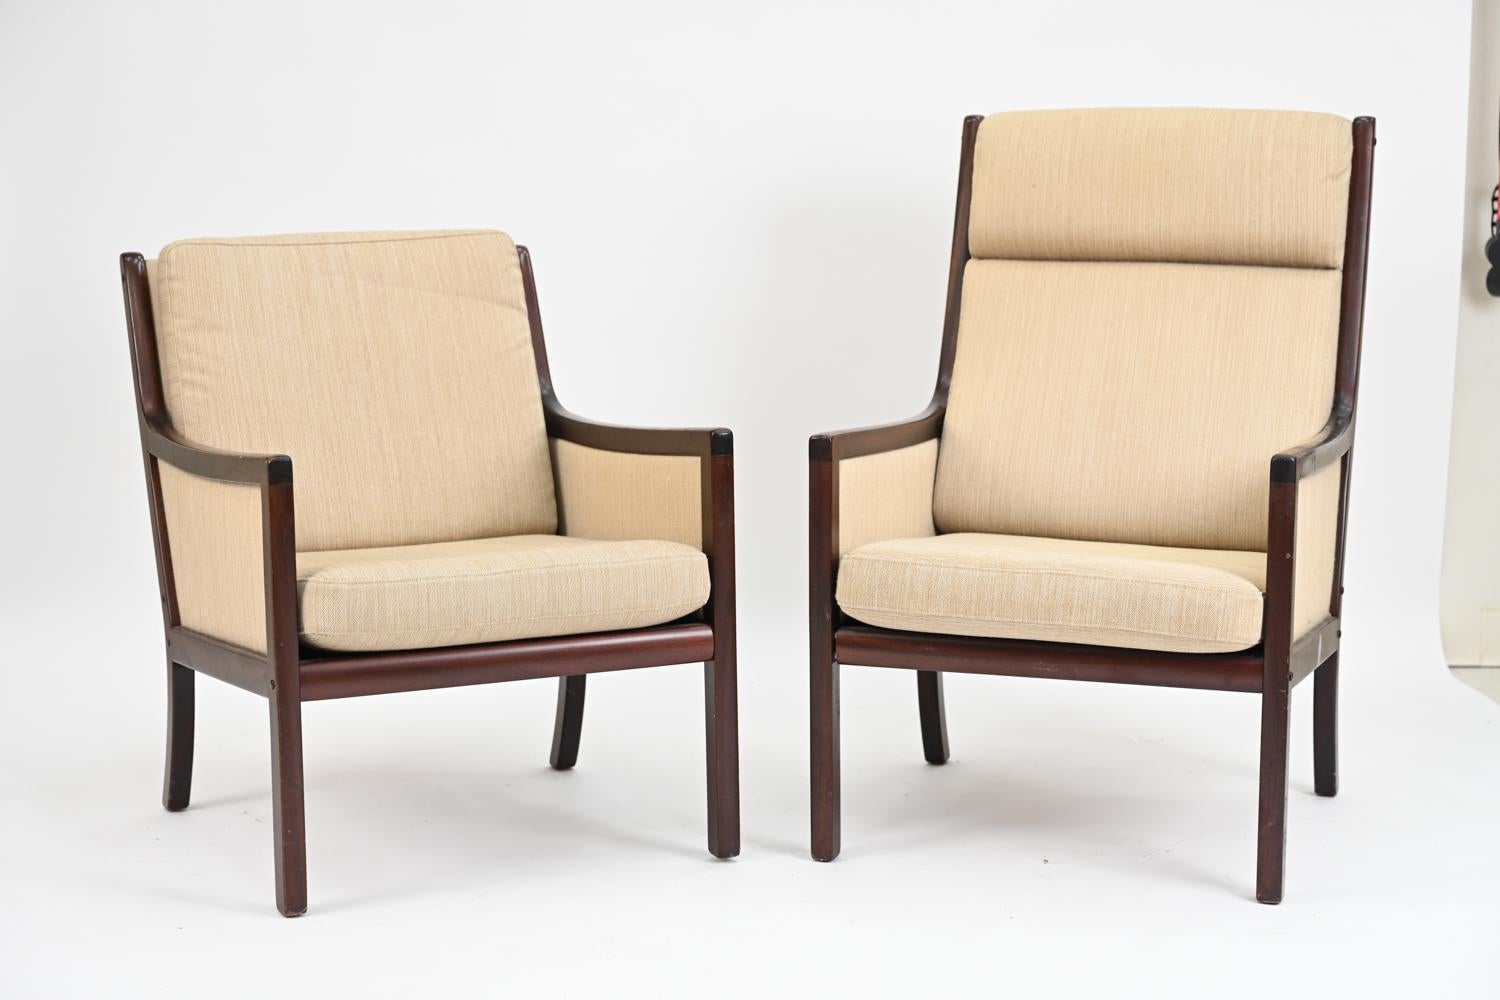 Mid-Century Modern Pair of Ole Wanscher for Poul Jeppesens Møbelfabrik Lounge Chairs